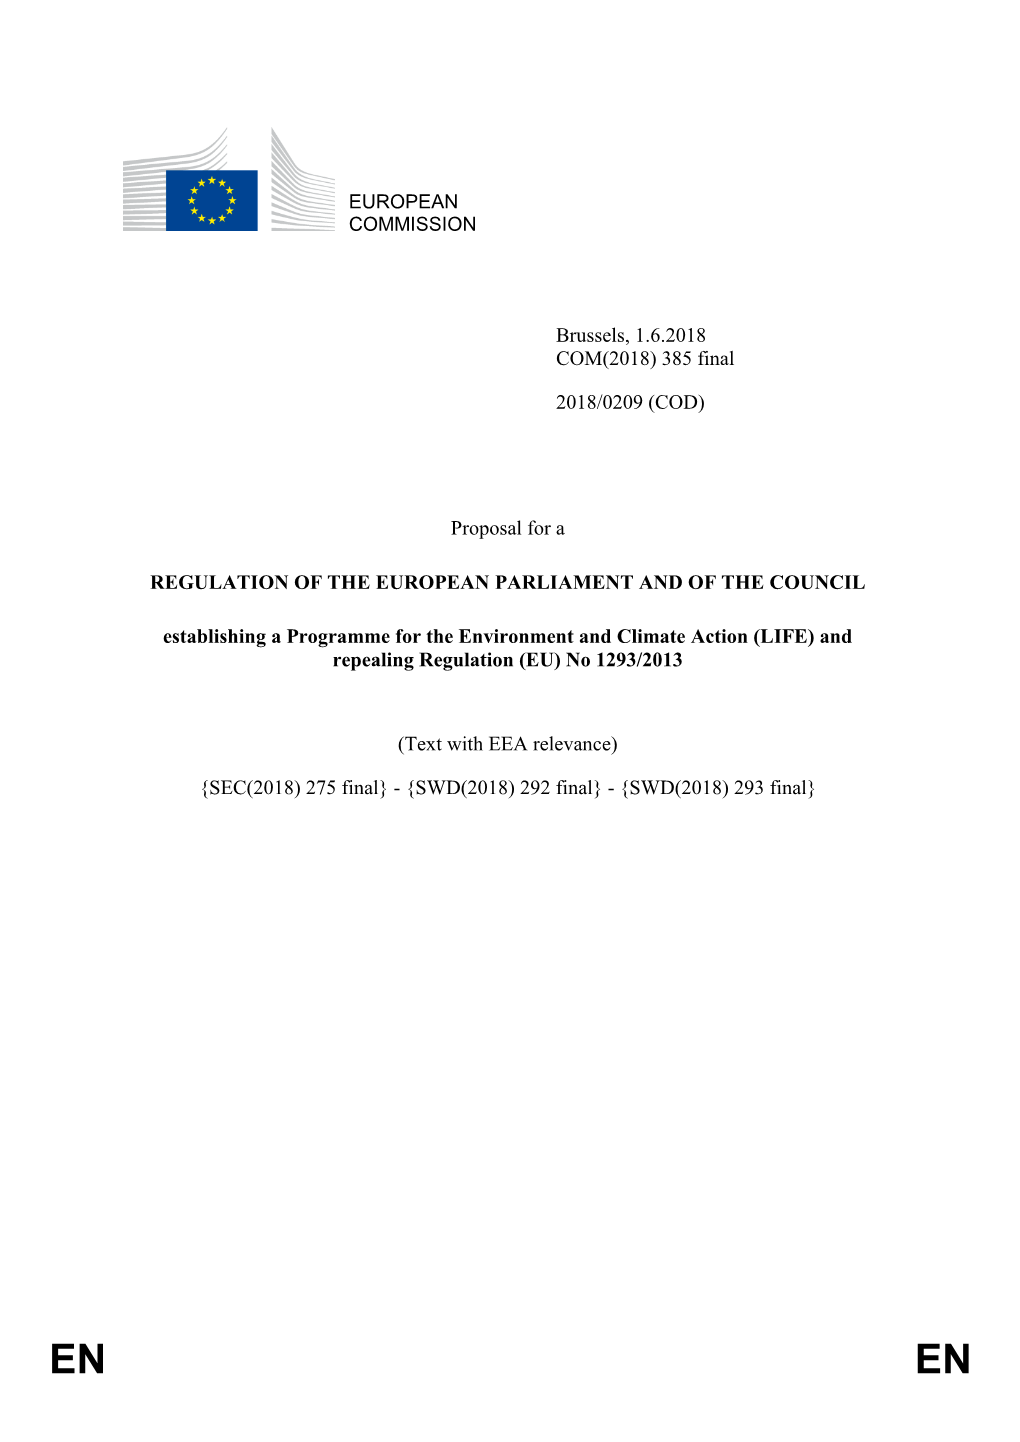 Programme for the Environment and Climate Action (LIFE) and Repealing Regulation (EU) No 1293/2013